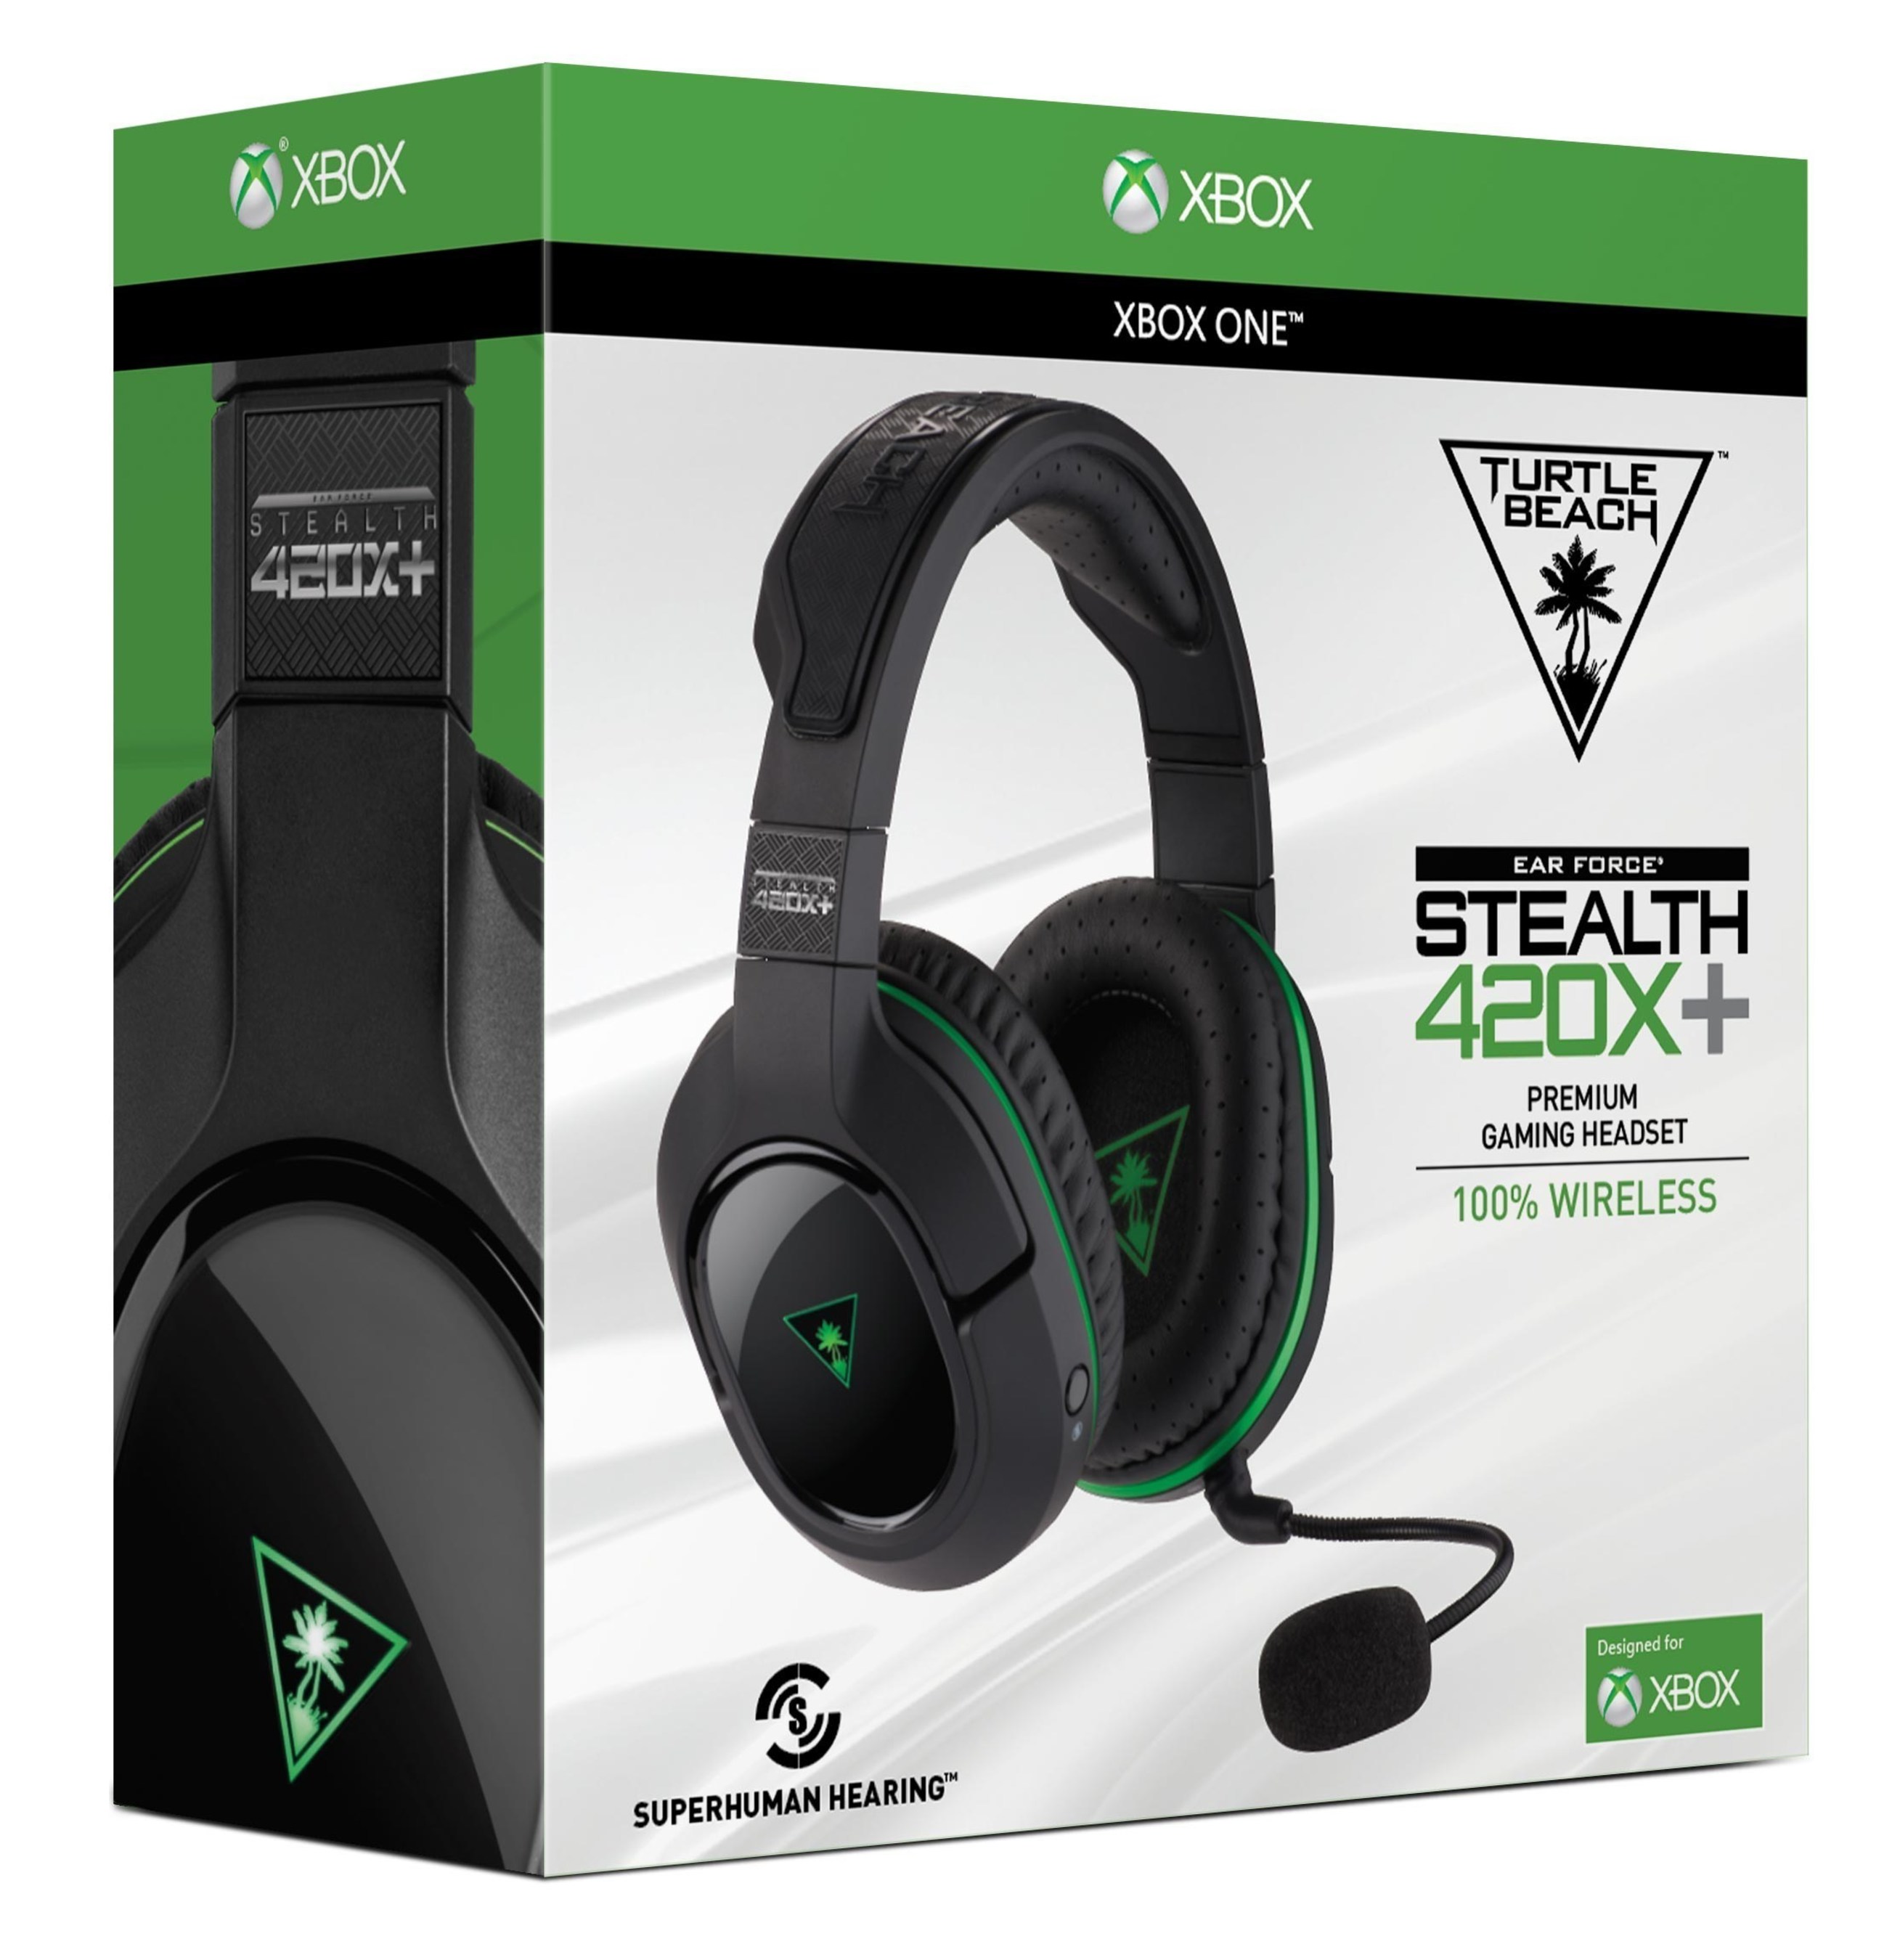 Turtle Beach's STEALTH 420X+ gaming headset is 100% wireless for Xbox One and now features Superhuman Hearing in addition to a ton of features no gamer should be without.